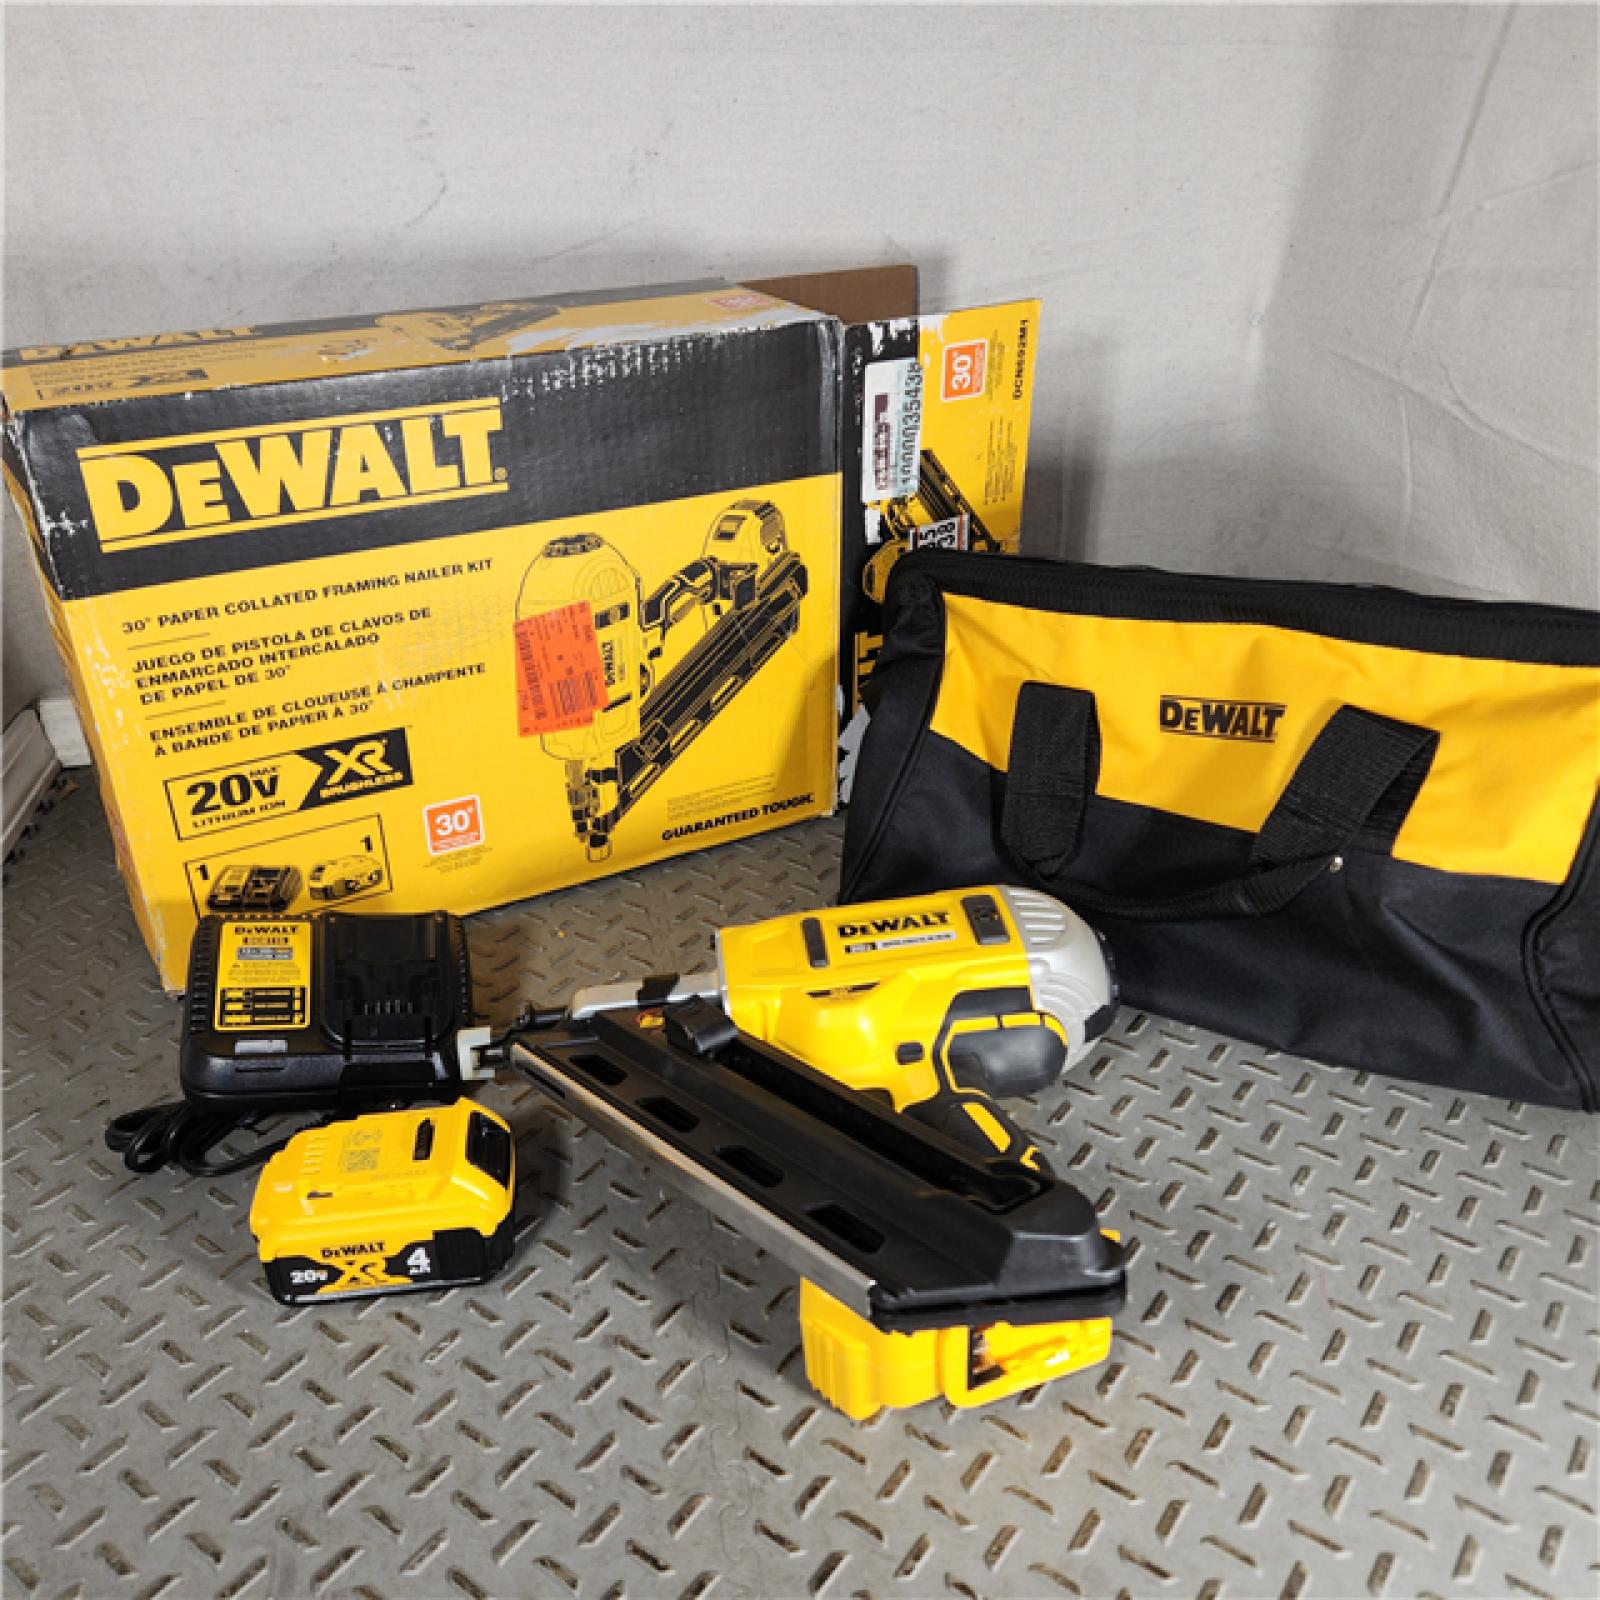 Houston location AS-IS DEWALT 20V MAX* Cordless 30  Paper Collated Framing Nailer Kit ( APPEARS IN NEW CONDITION)